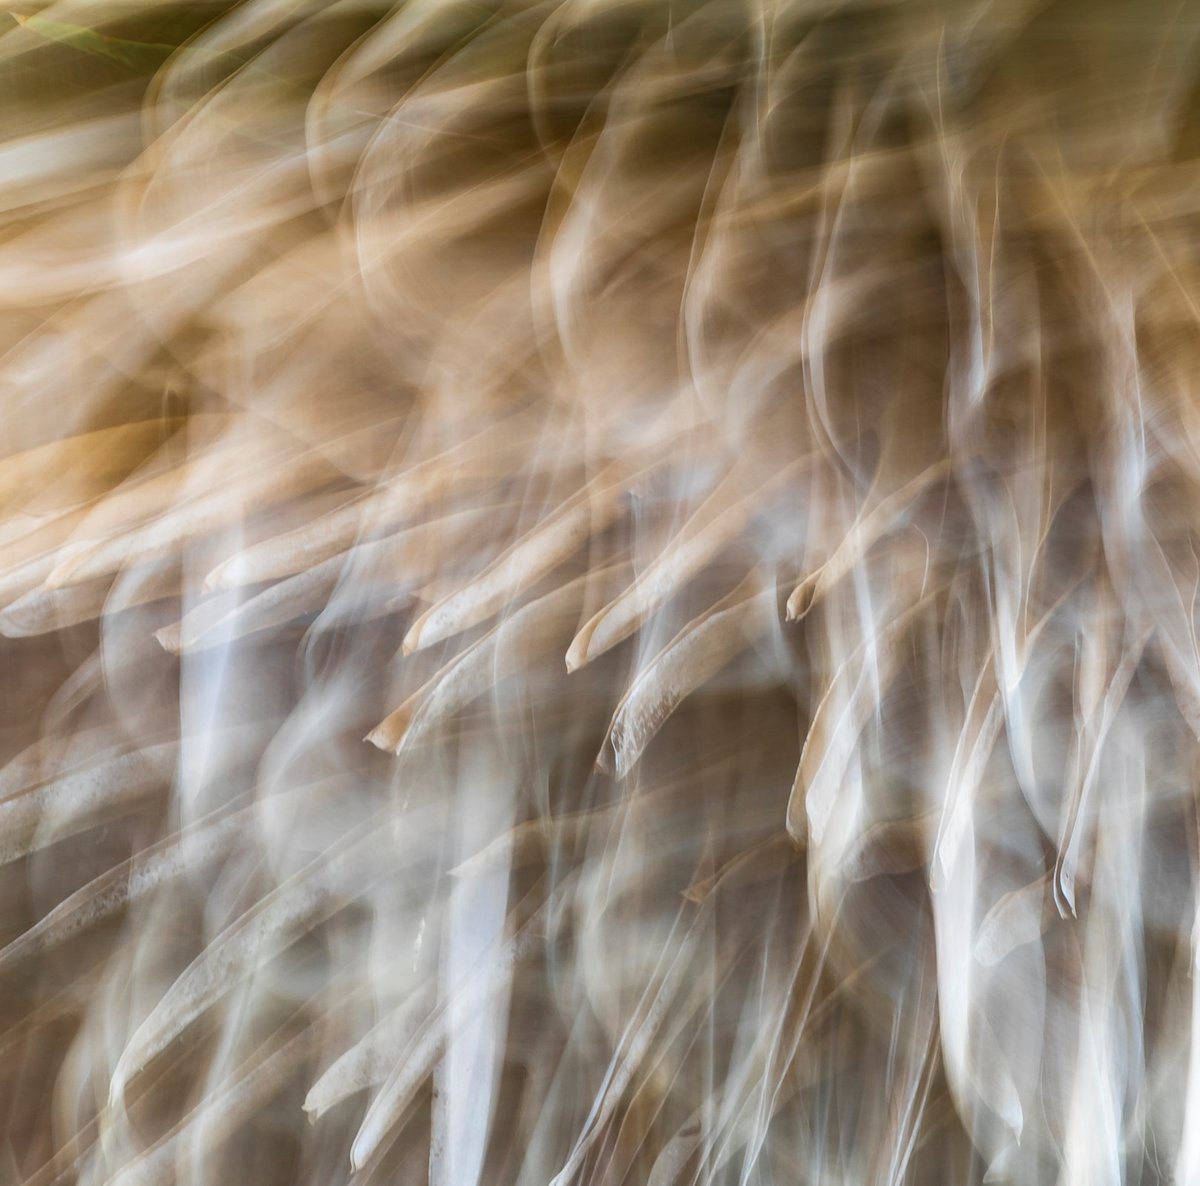 'Visions ( visiones)' by Cilia Rodriguez 

#Embajadoresdelarte #abstractphotography #ICMPhotoMag #ICMPhotographyMagazine #intentionalcameramovement #intentionalblur #ICM #ICMPhotography #abstractICM #abstracted #abstract #abstractphotography #abstractart #artistsontwitter #art